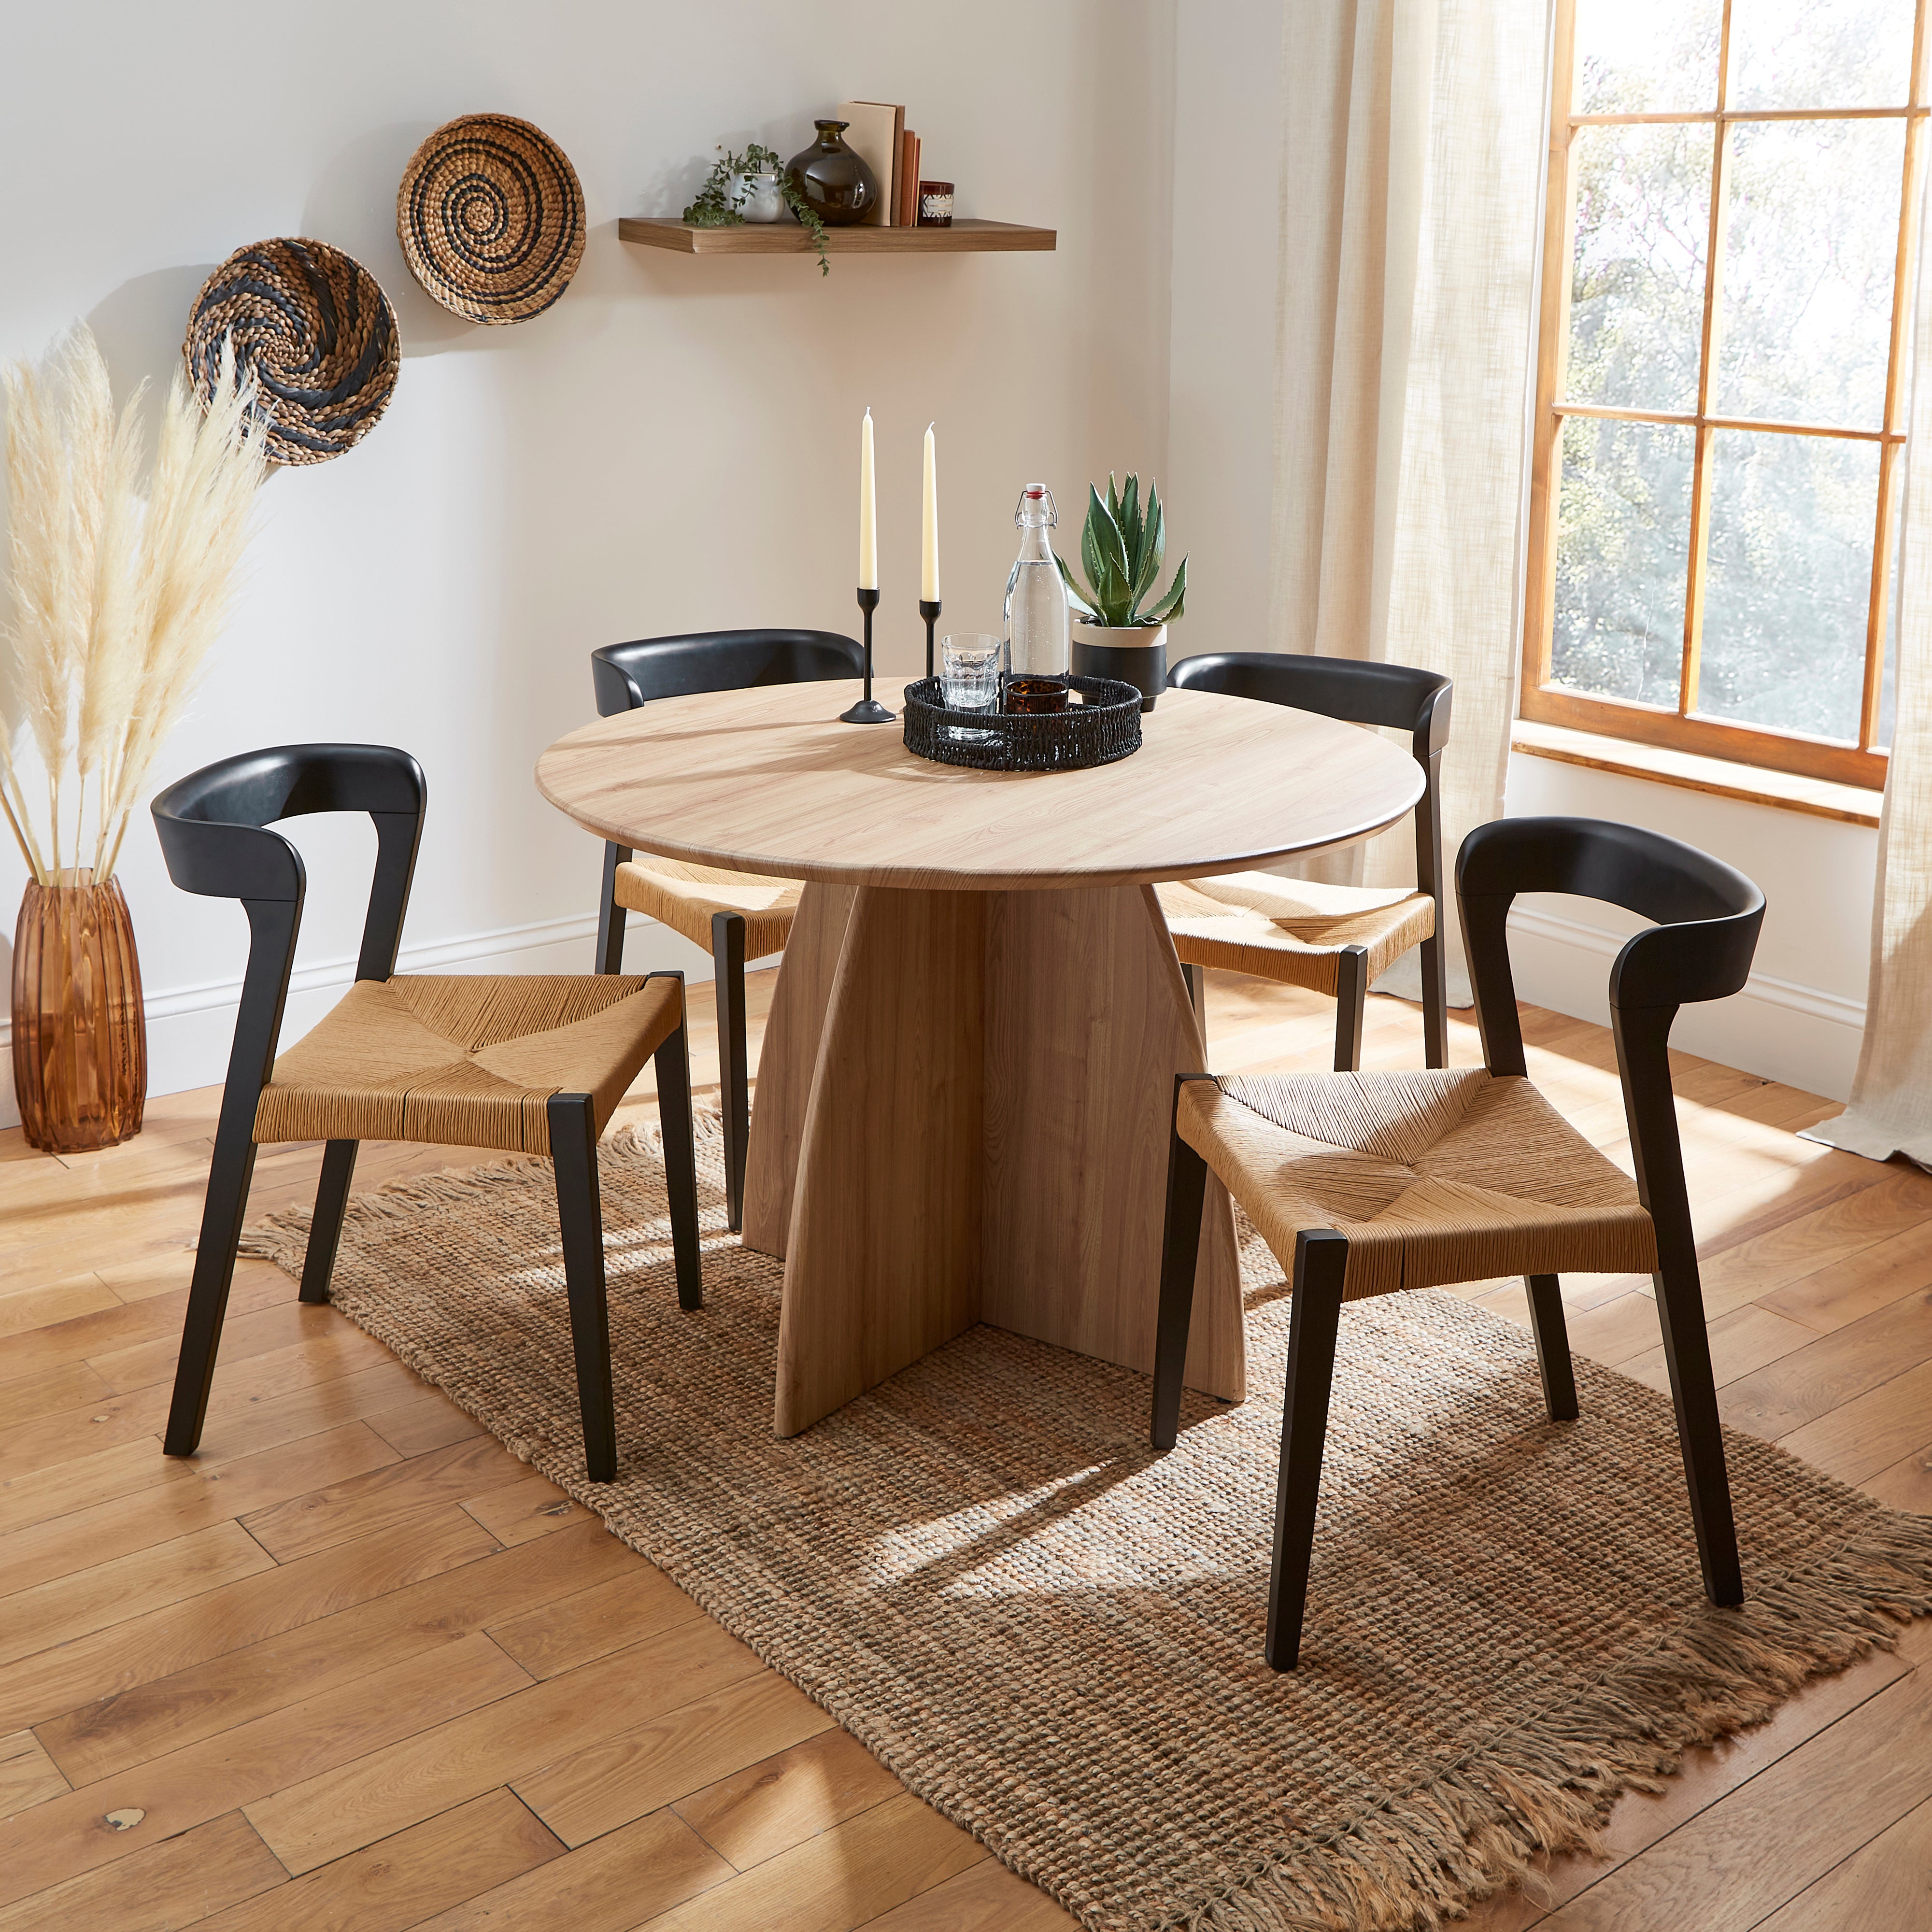 Effy 4 Seater Round Dining Table Wood Effect Natural